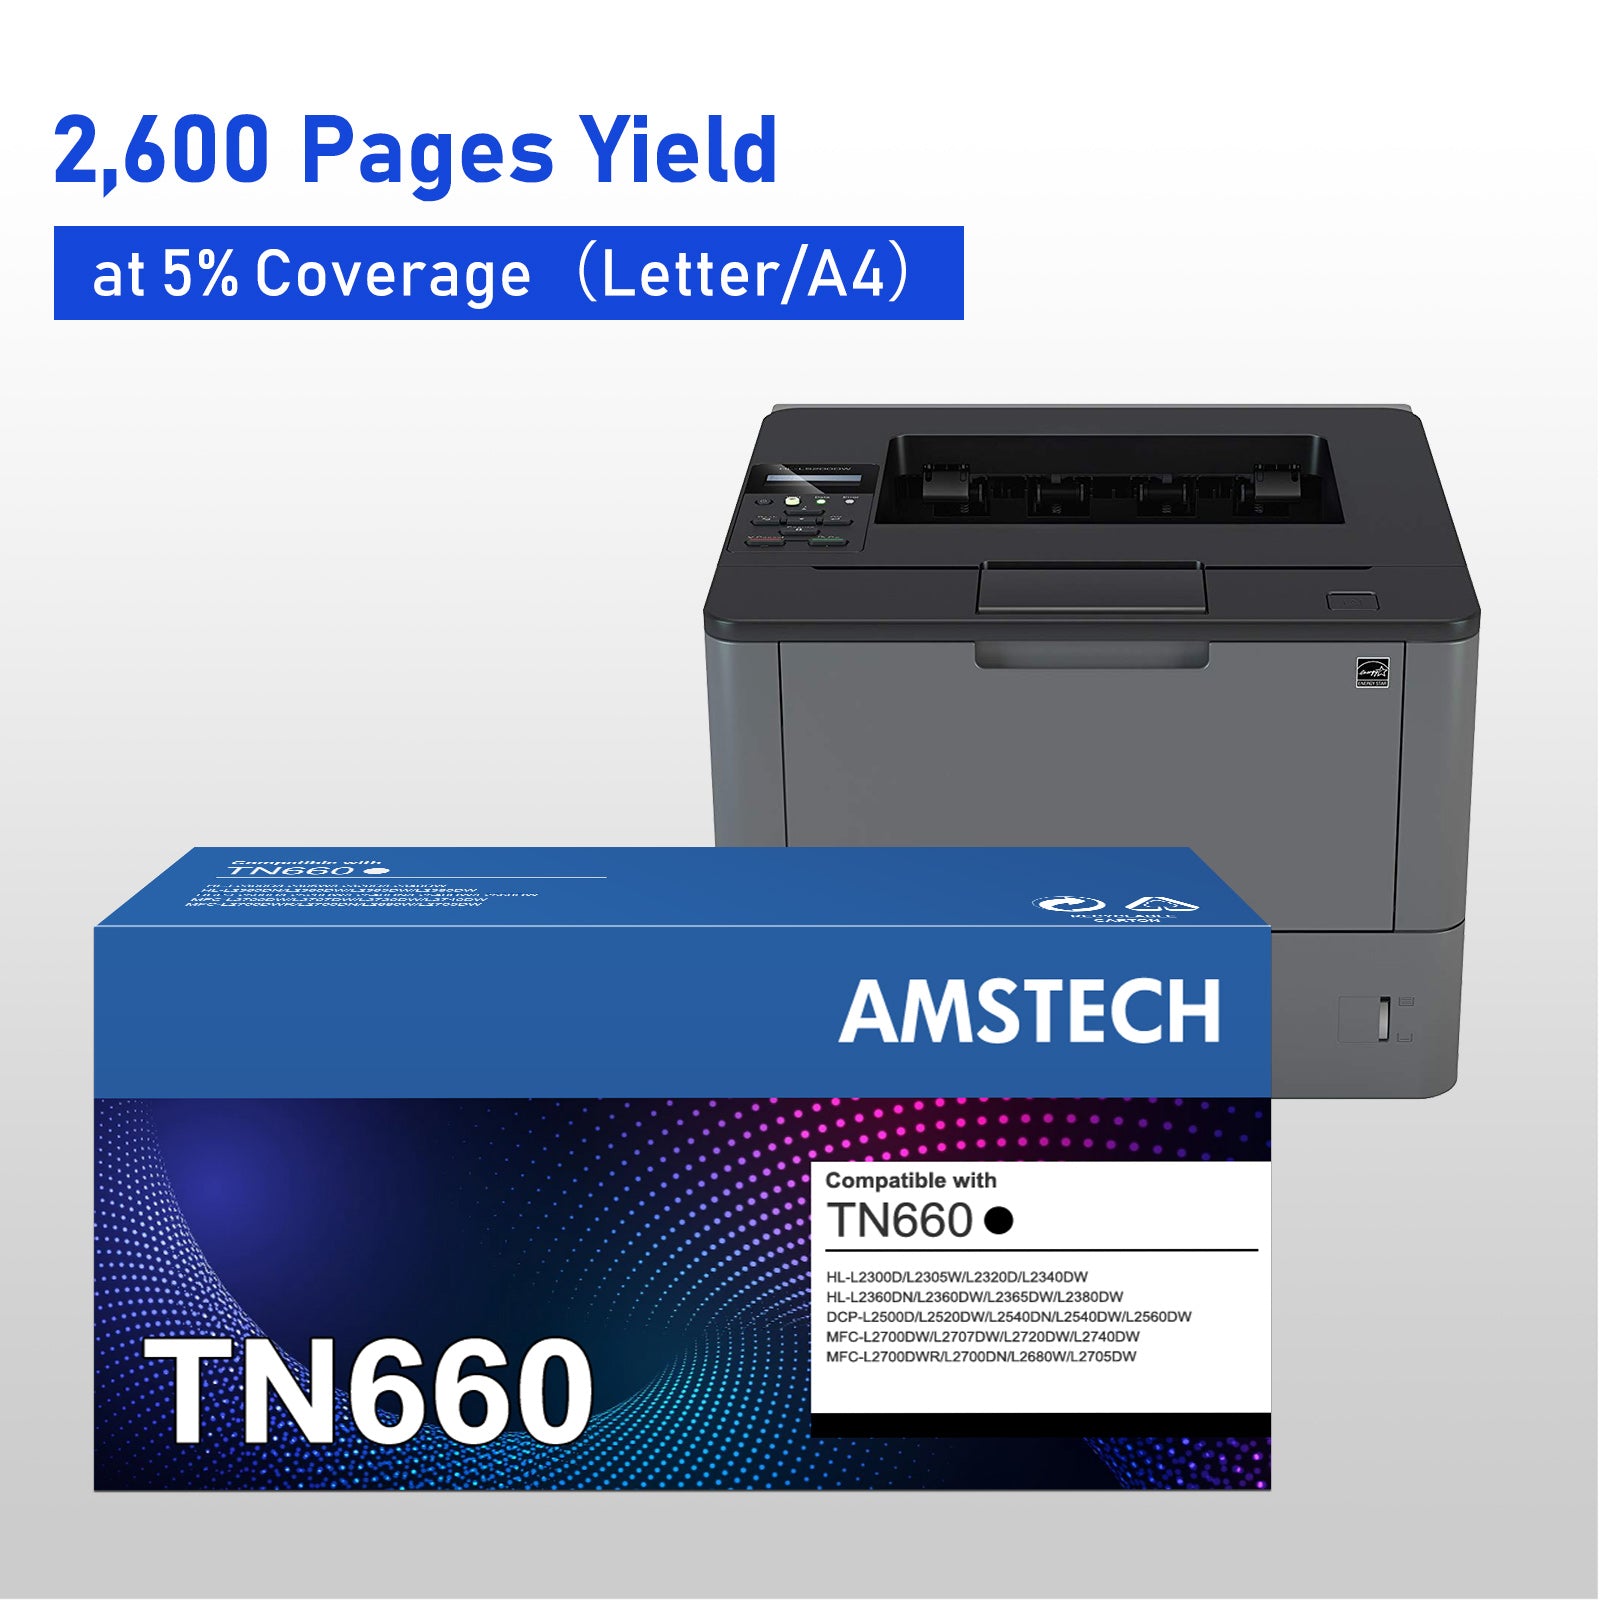 TN660 Toner Cartridge Compatible for Brother TN660 TN-660 TN 660 TN630 HL-L2380DW MFC-L2700DW HL-L2300D HL-L2320D HL-L2340DW DCP-L2540DW Printer Ink (High Yield 4 Black)